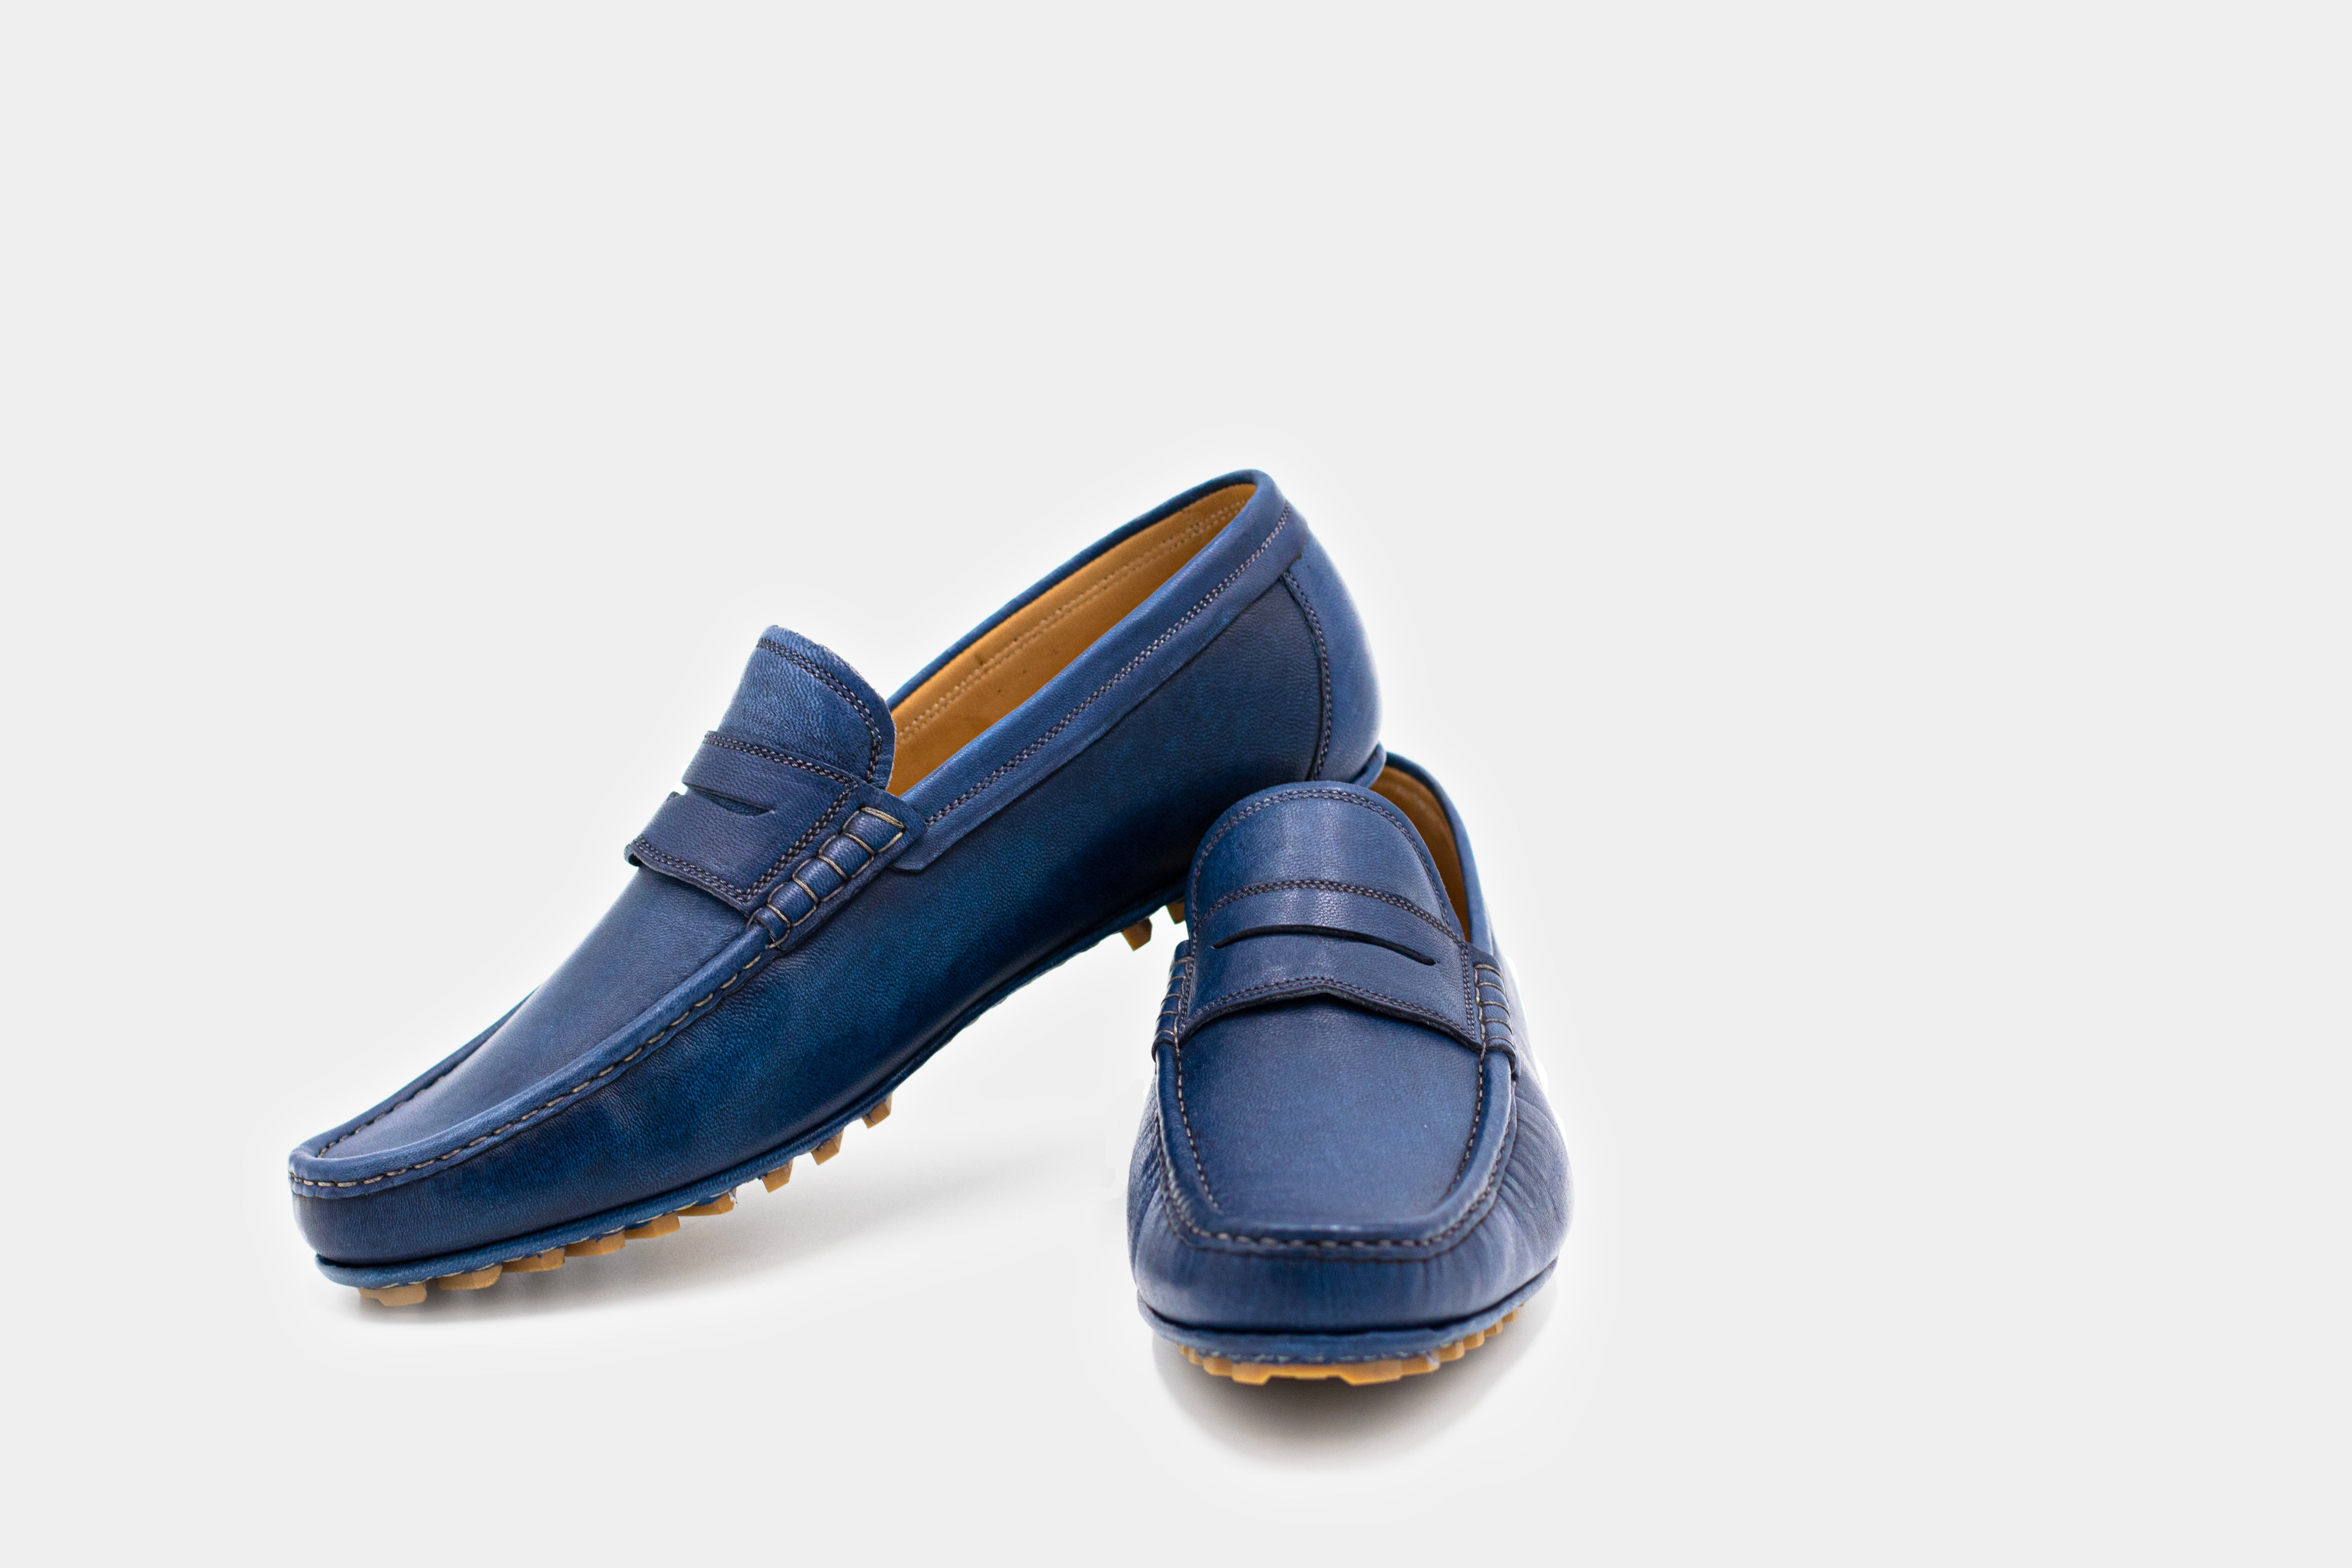 Parlanti Men's Loafers